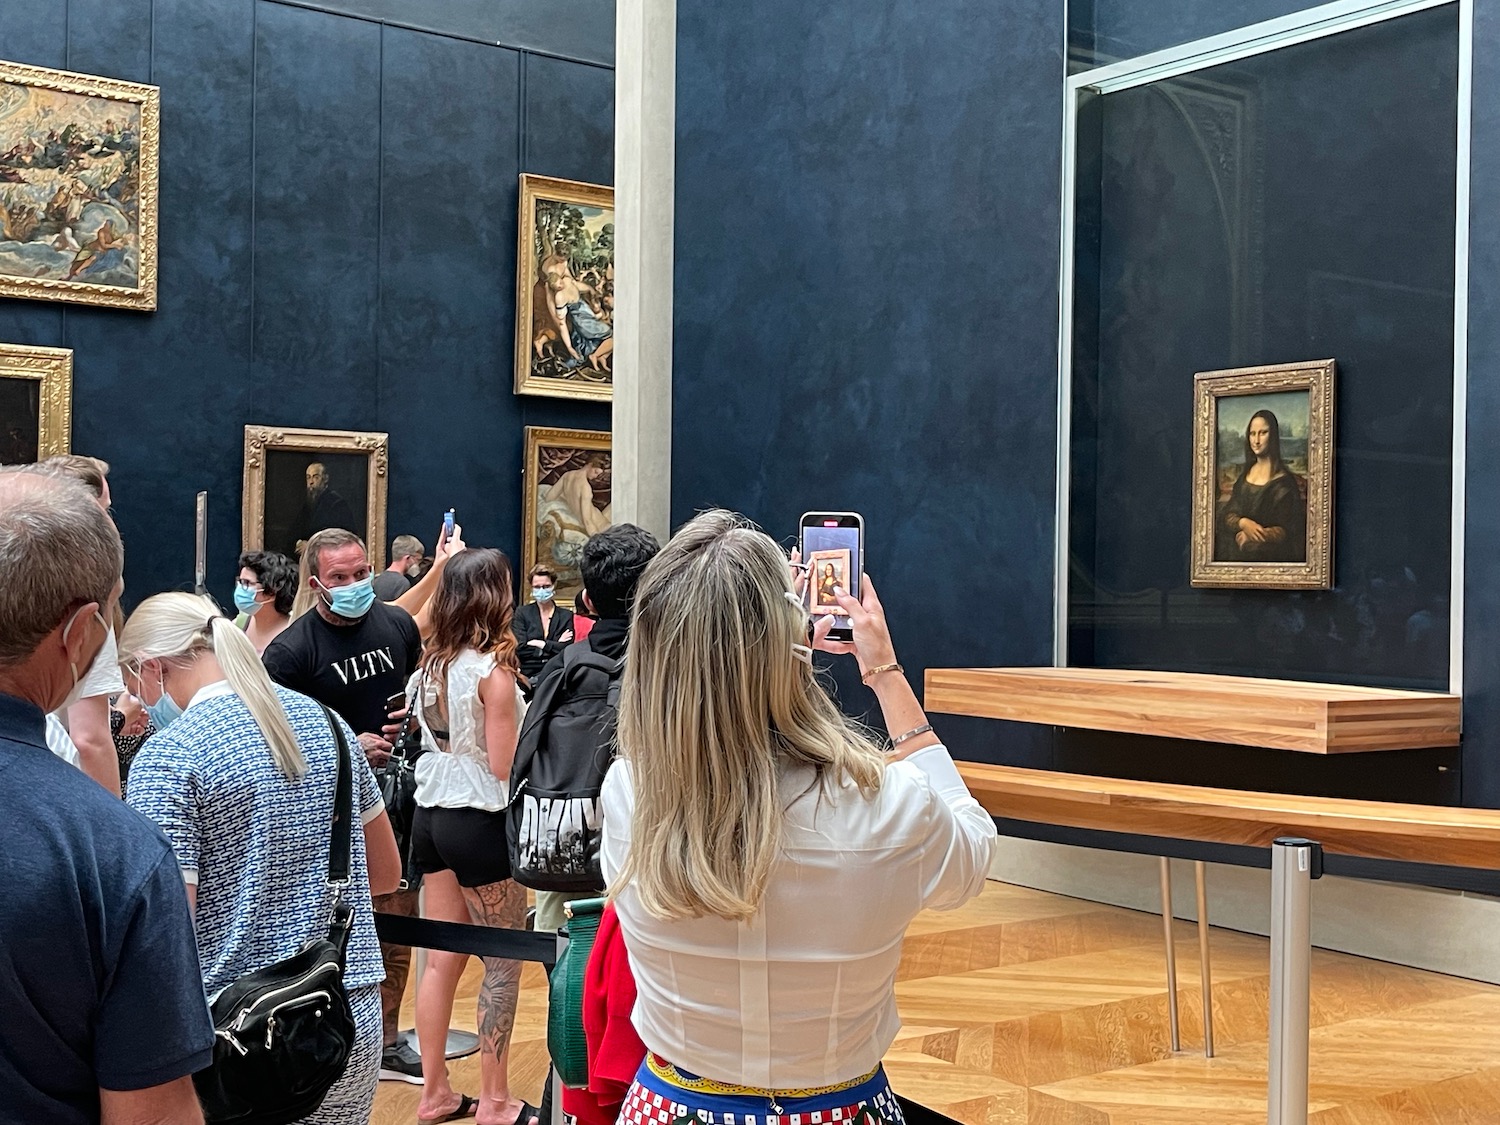 a woman taking a picture of a painting